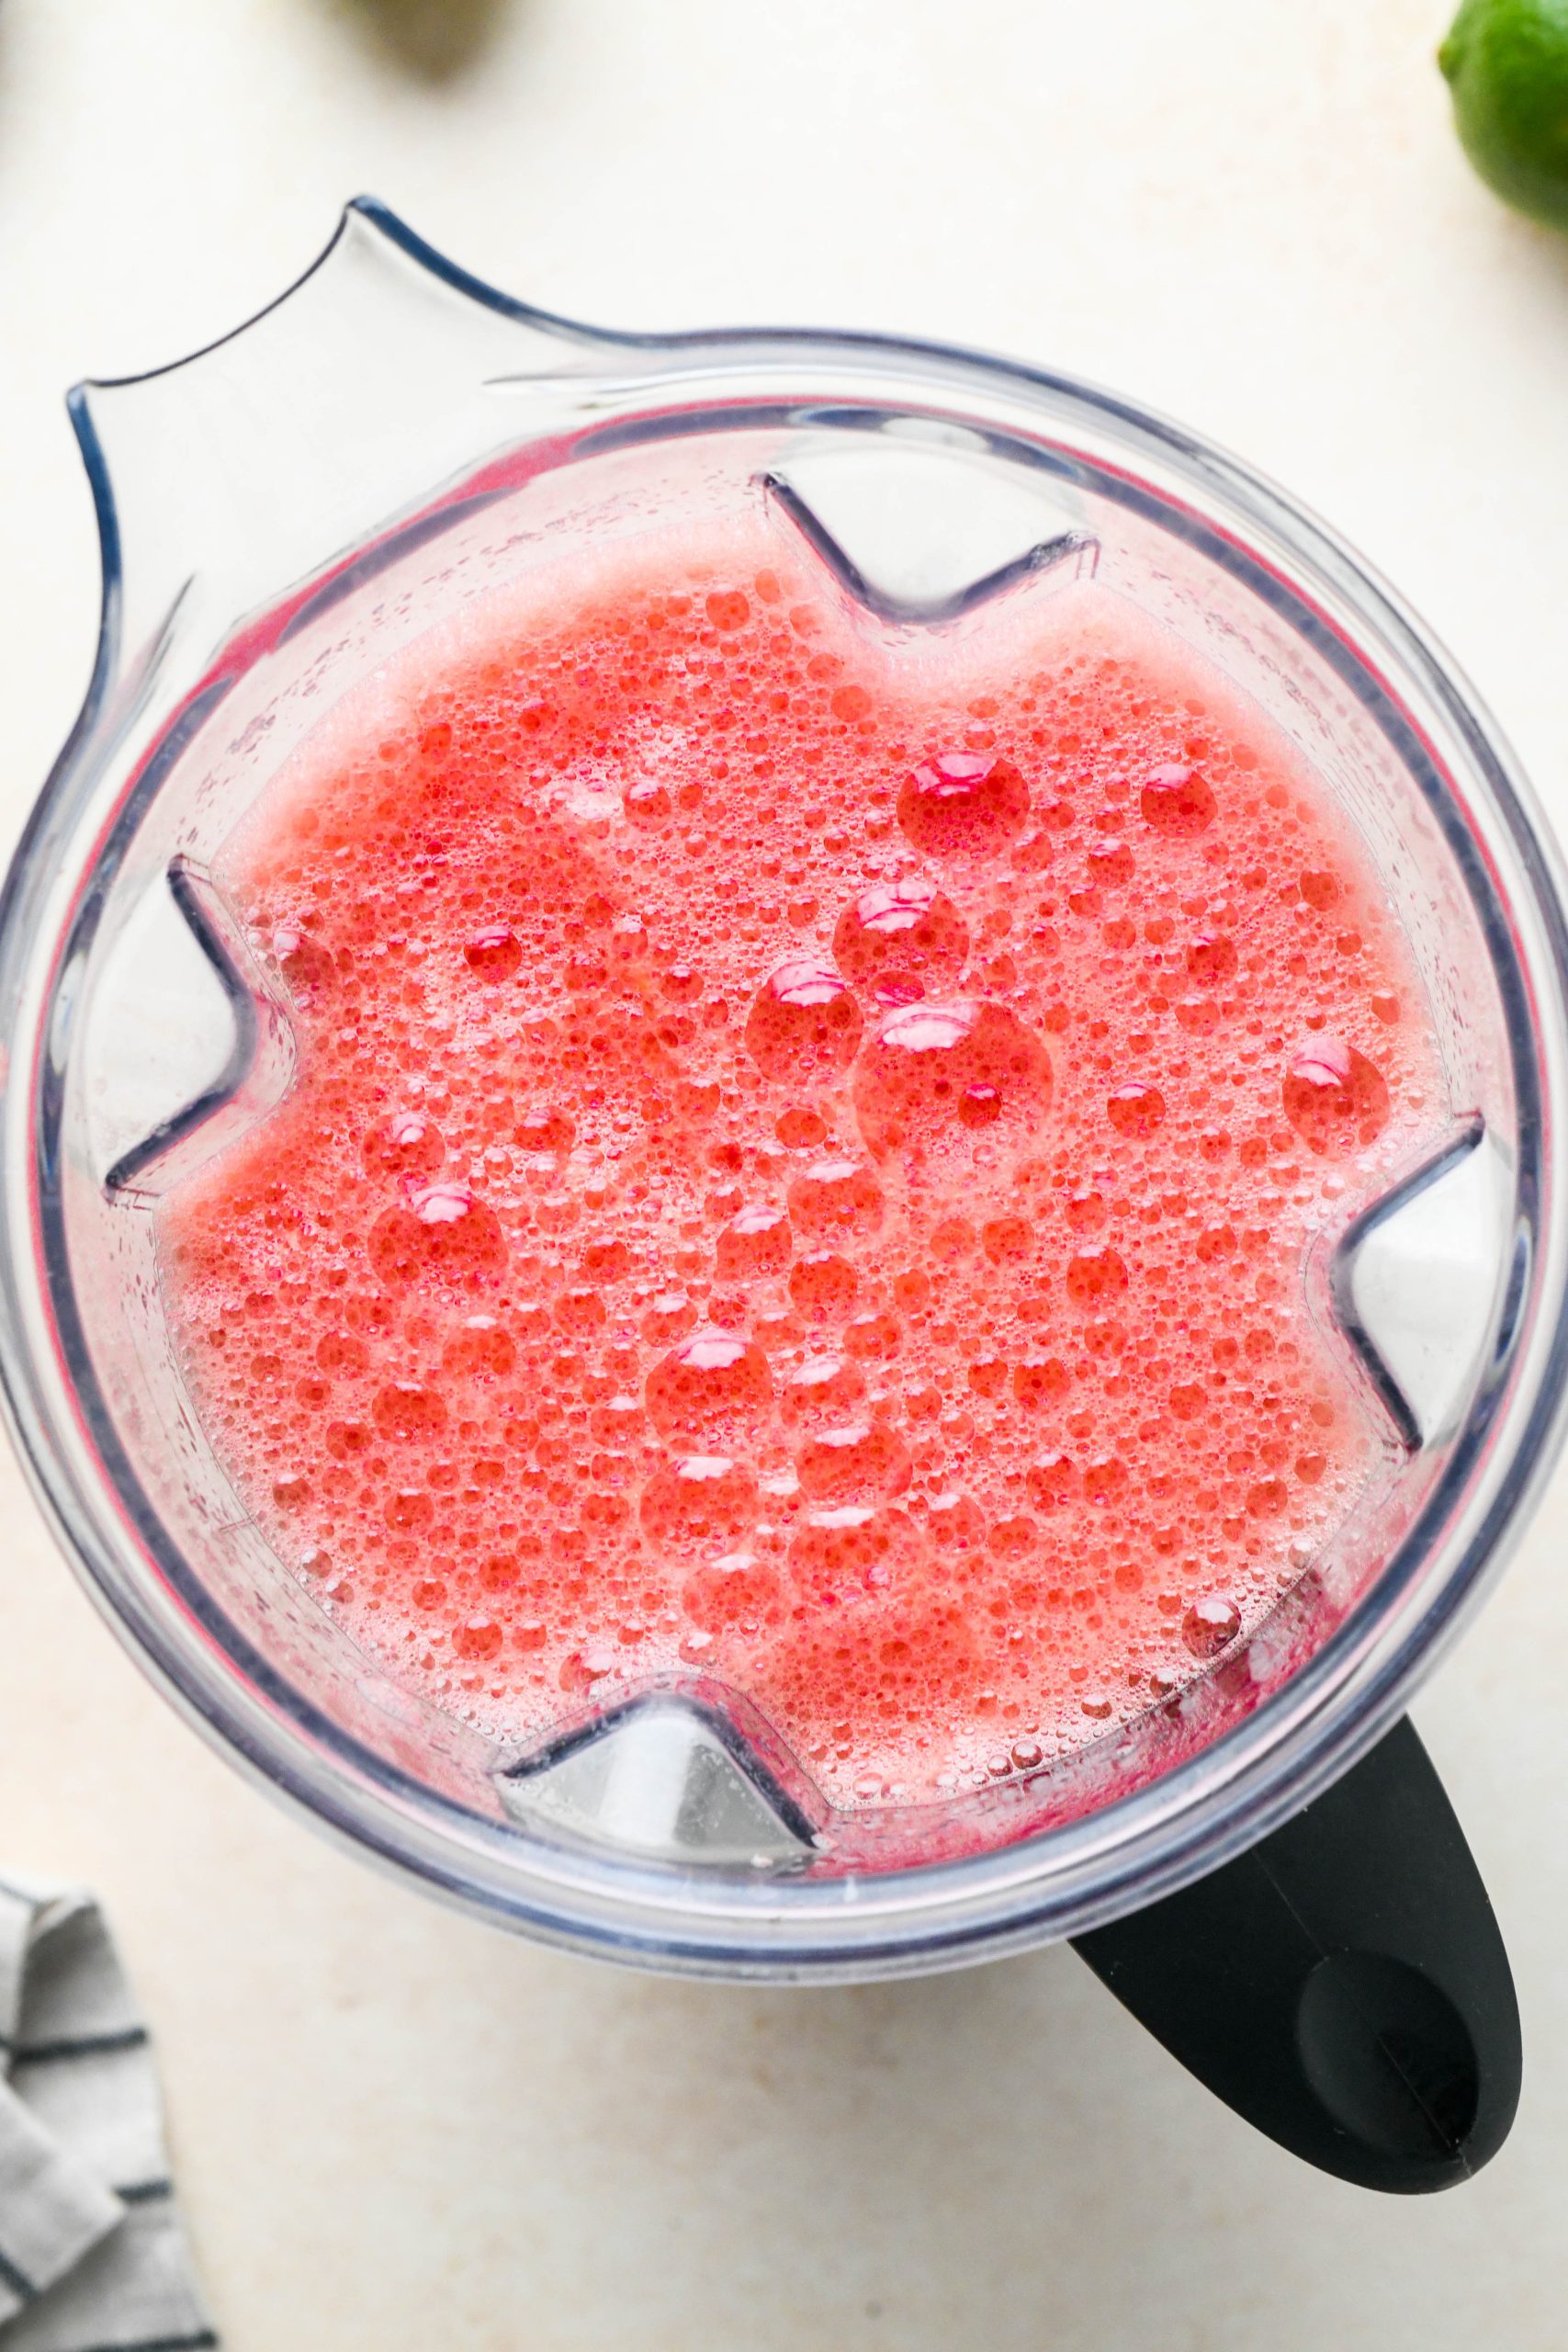 How to make watermelon juice: Blended watermelon juice in a blender container.